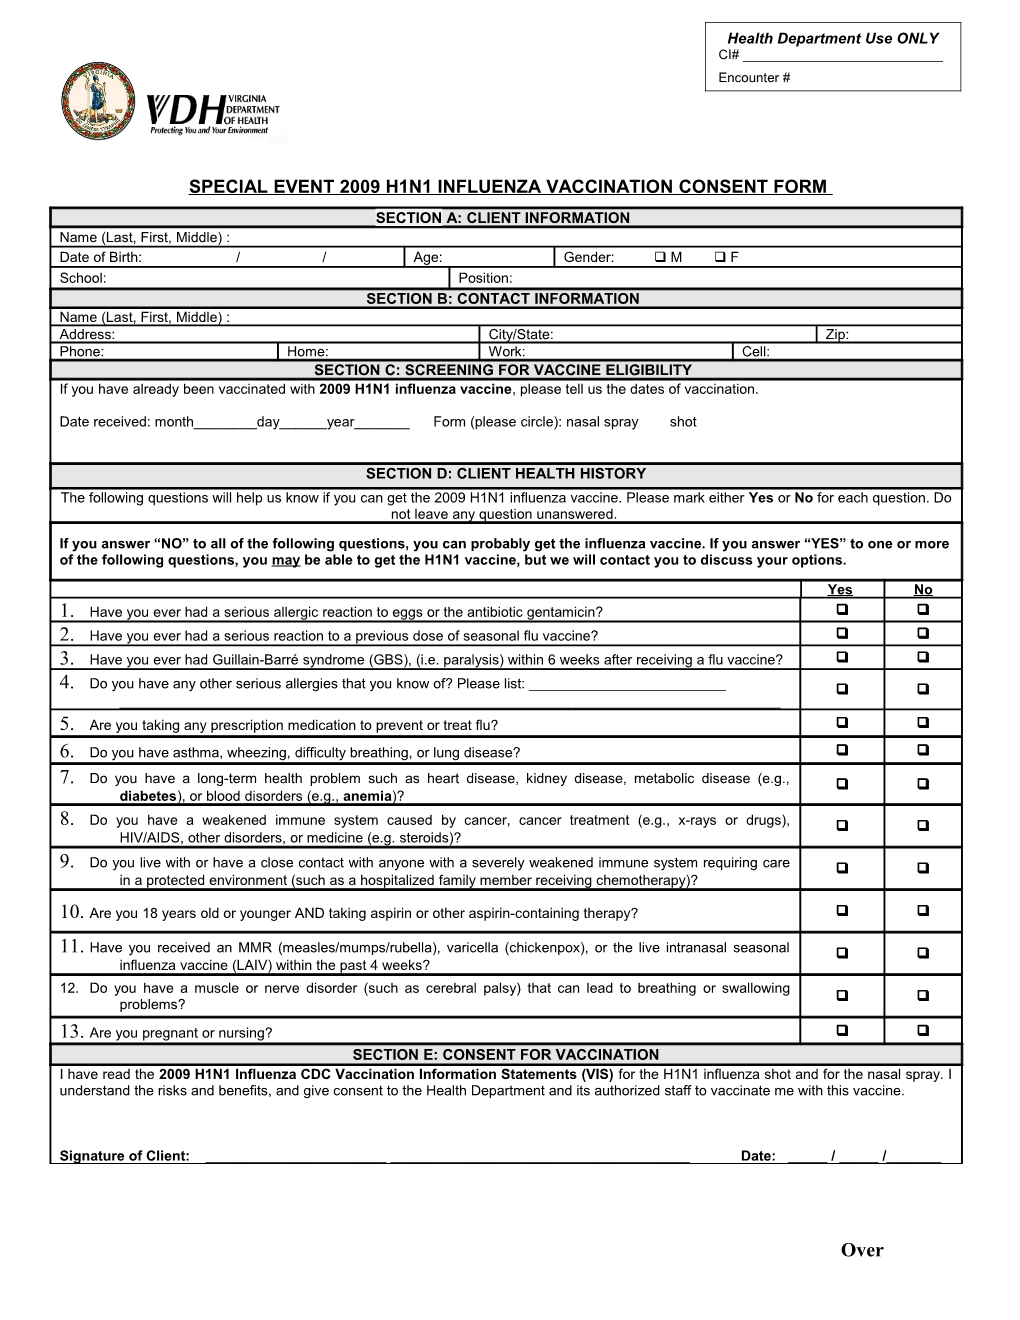 Special Event2009 H1n1influenza Vaccination Consent Form